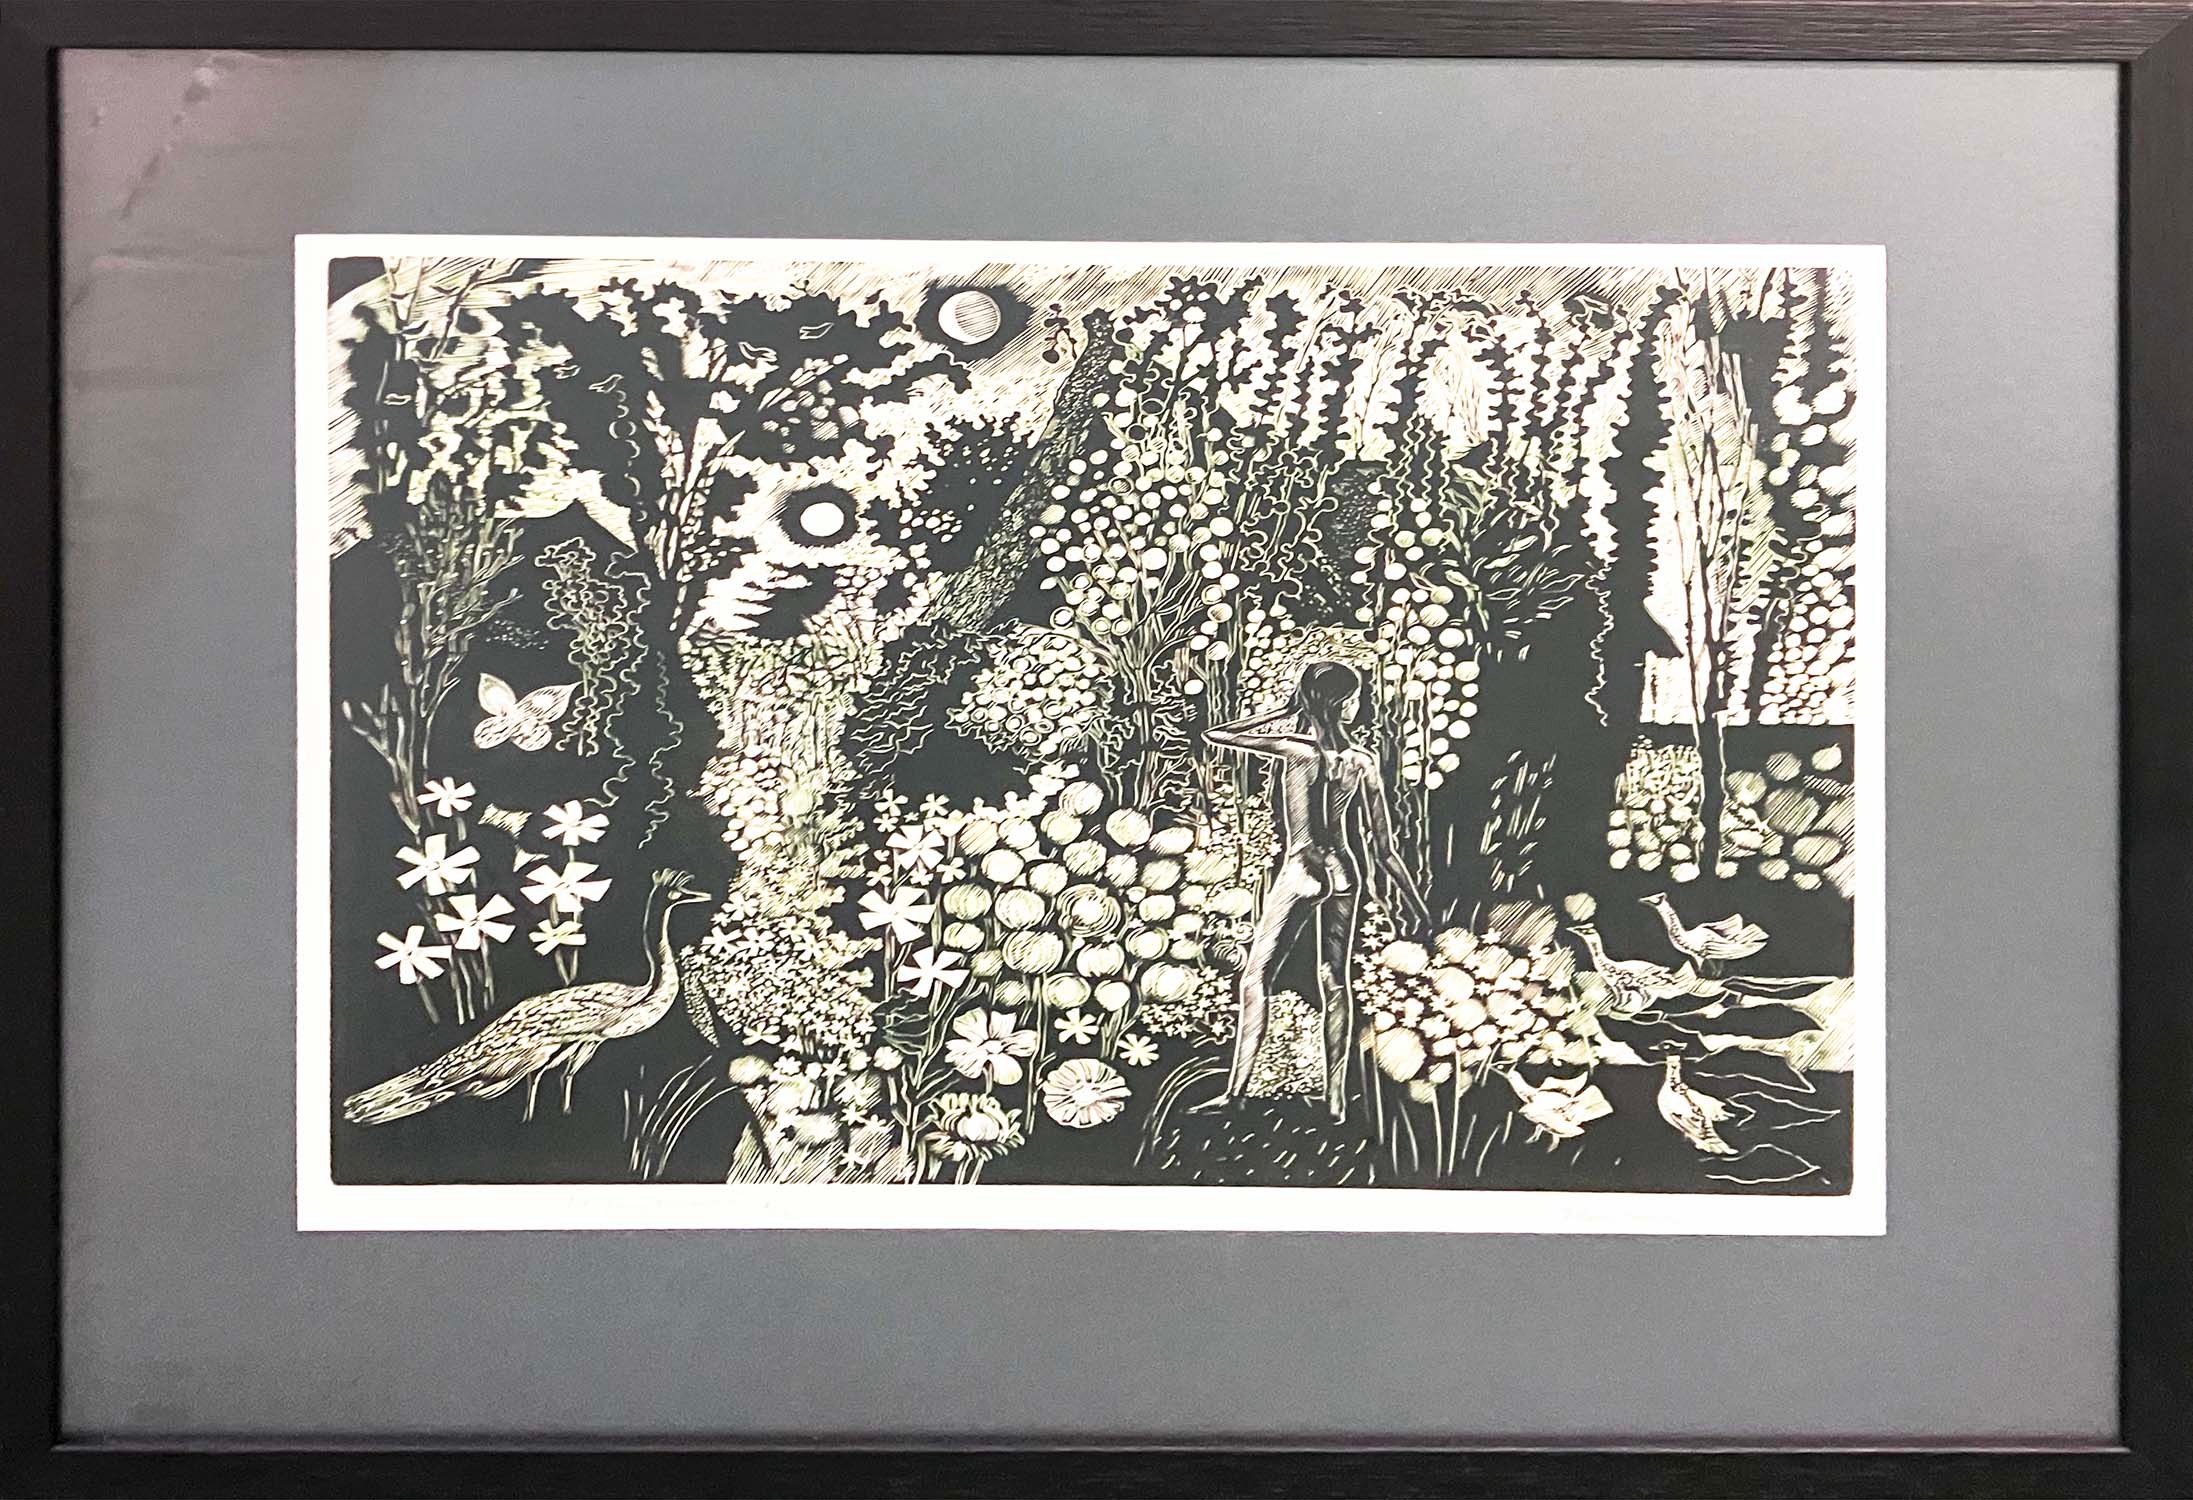 JOHN “SCORROR” O'CONNOR RWS ARCA (1913-2004) 'The Young wood” engraving, signed, titled and numbered